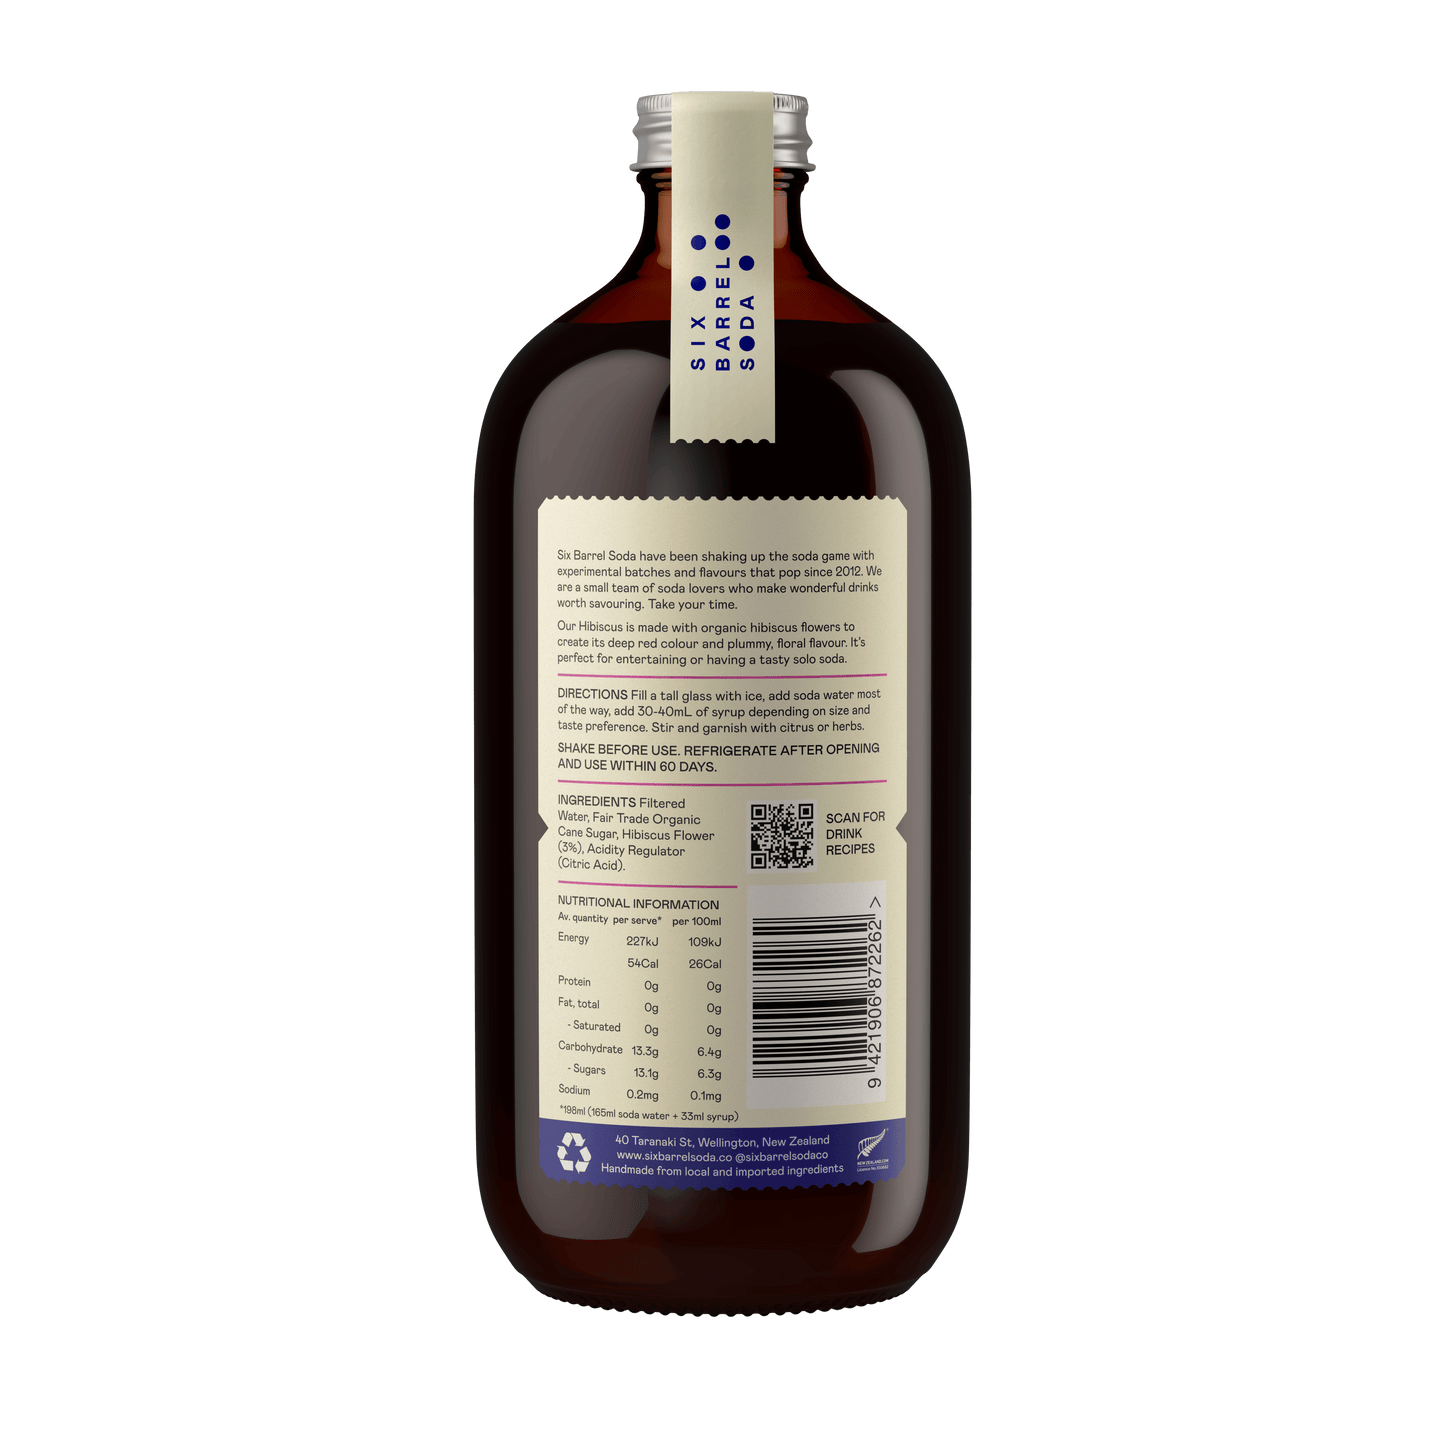 Buy wholesale Hibiscus syrup